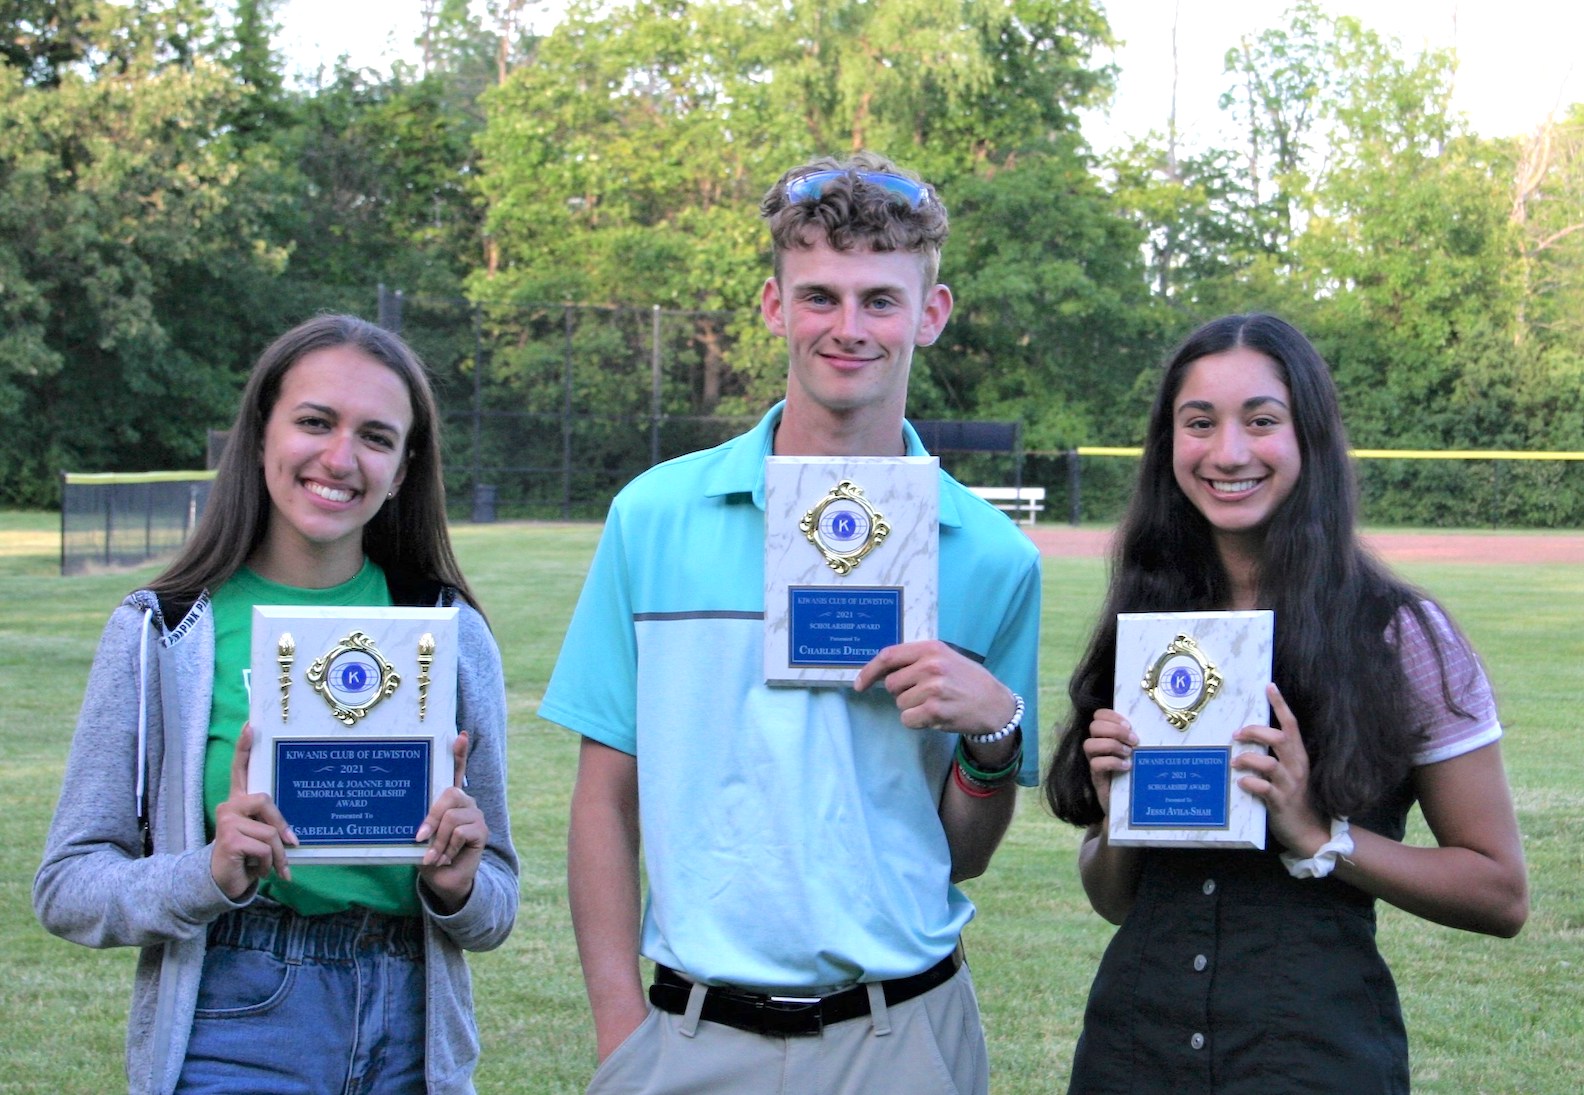 Pictured, from left, are scholarship recipients: Isabella Guerrucci, Charles Dieteman and Jessi Avila-Shah. Not pictured: Amaris Huang.